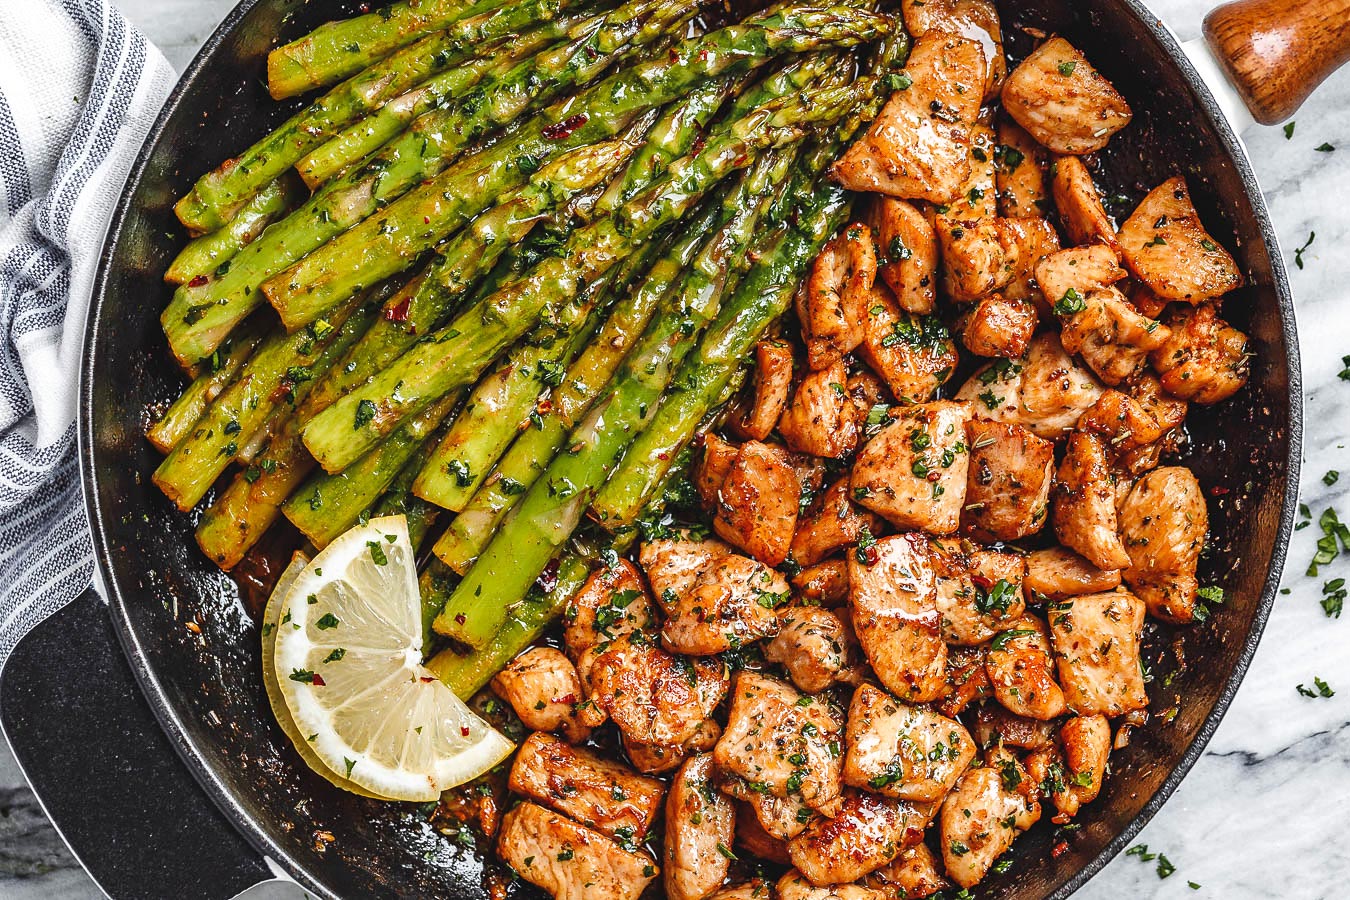 Top 3 Chicken And Asparagus Recipes